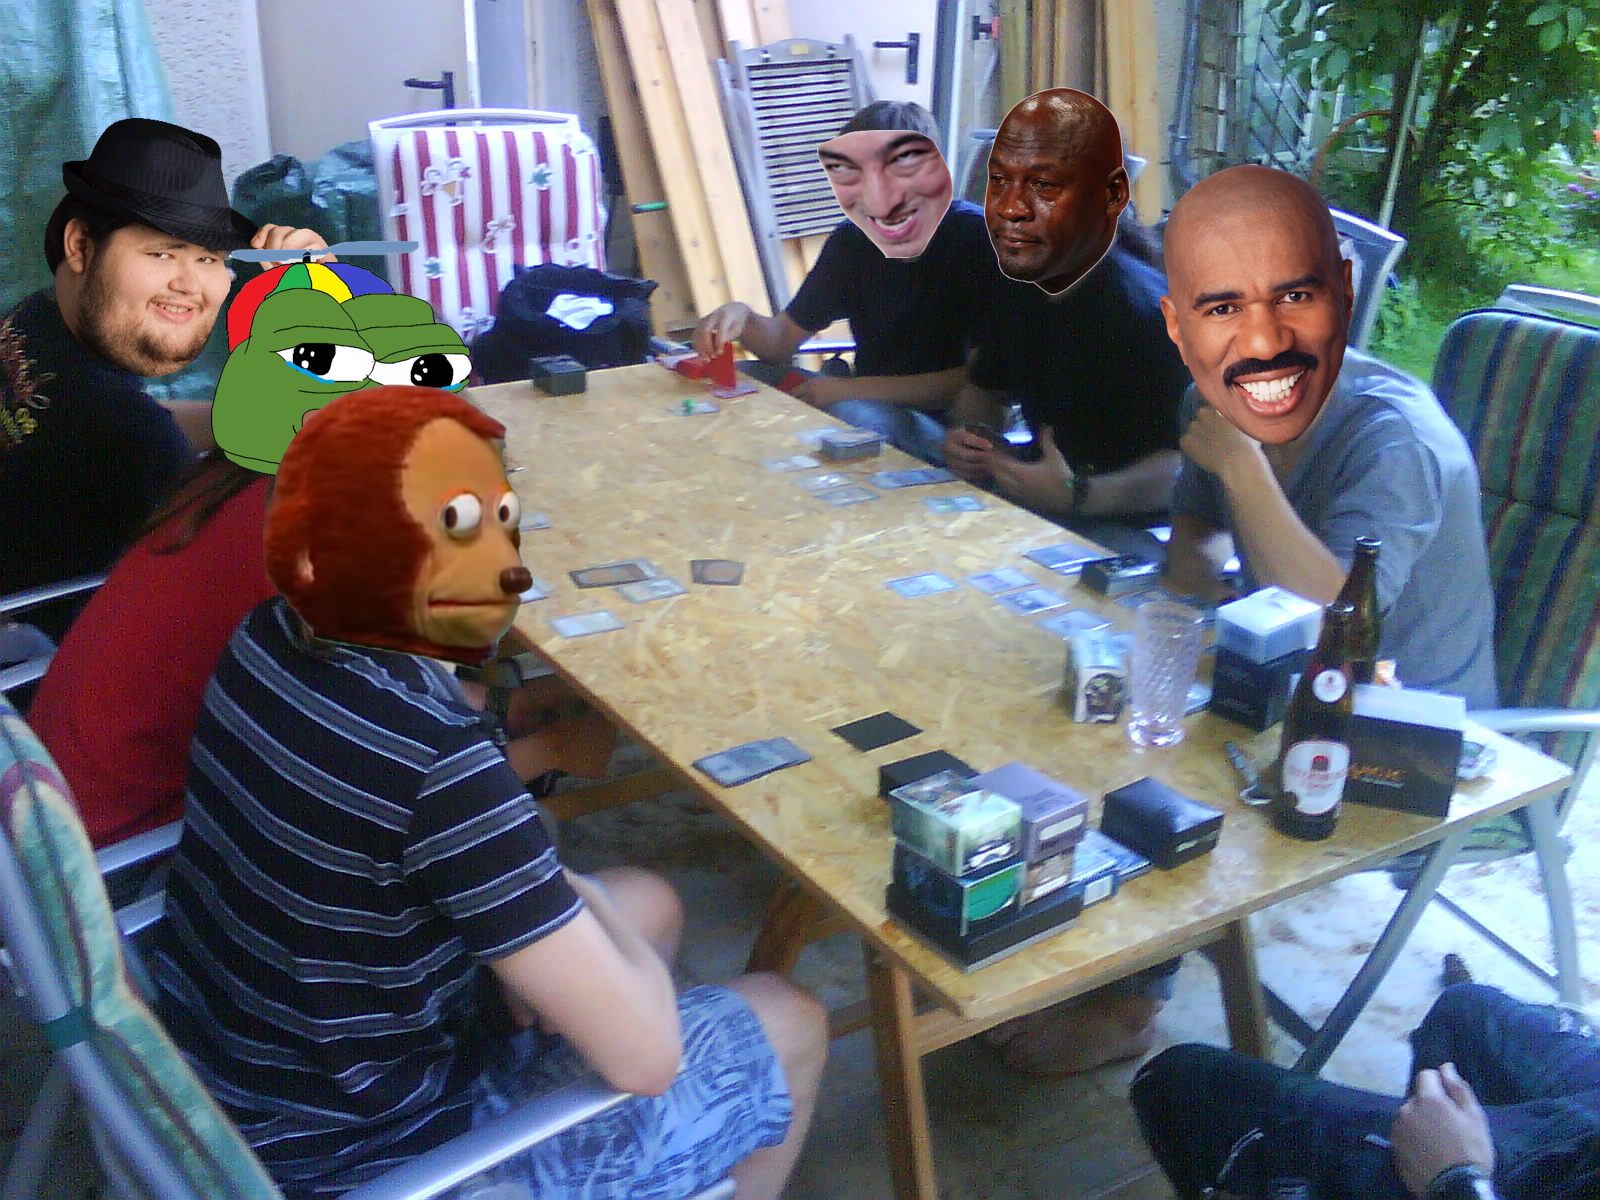 Back in the days playing Magic with my frens